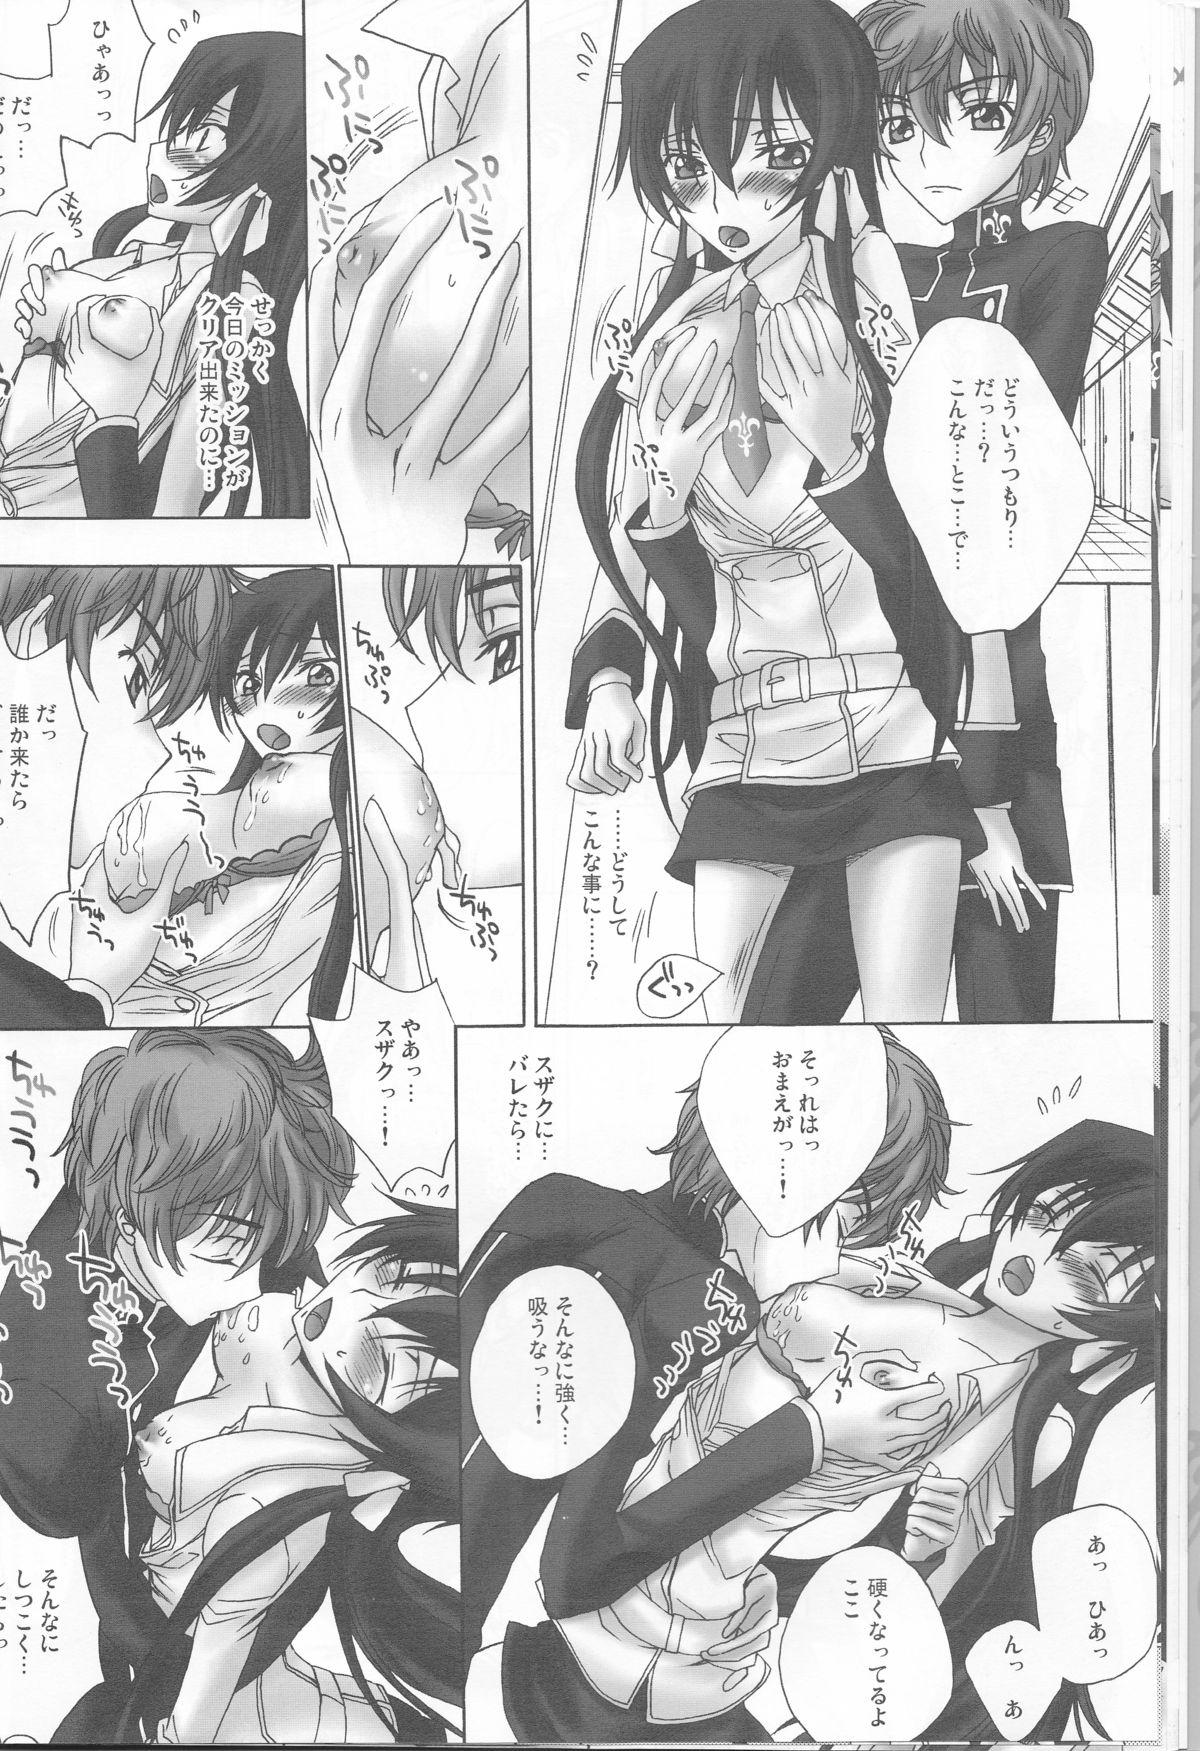 Moan Lyrical Rule StrikerS - Code geass Ethnic - Page 10